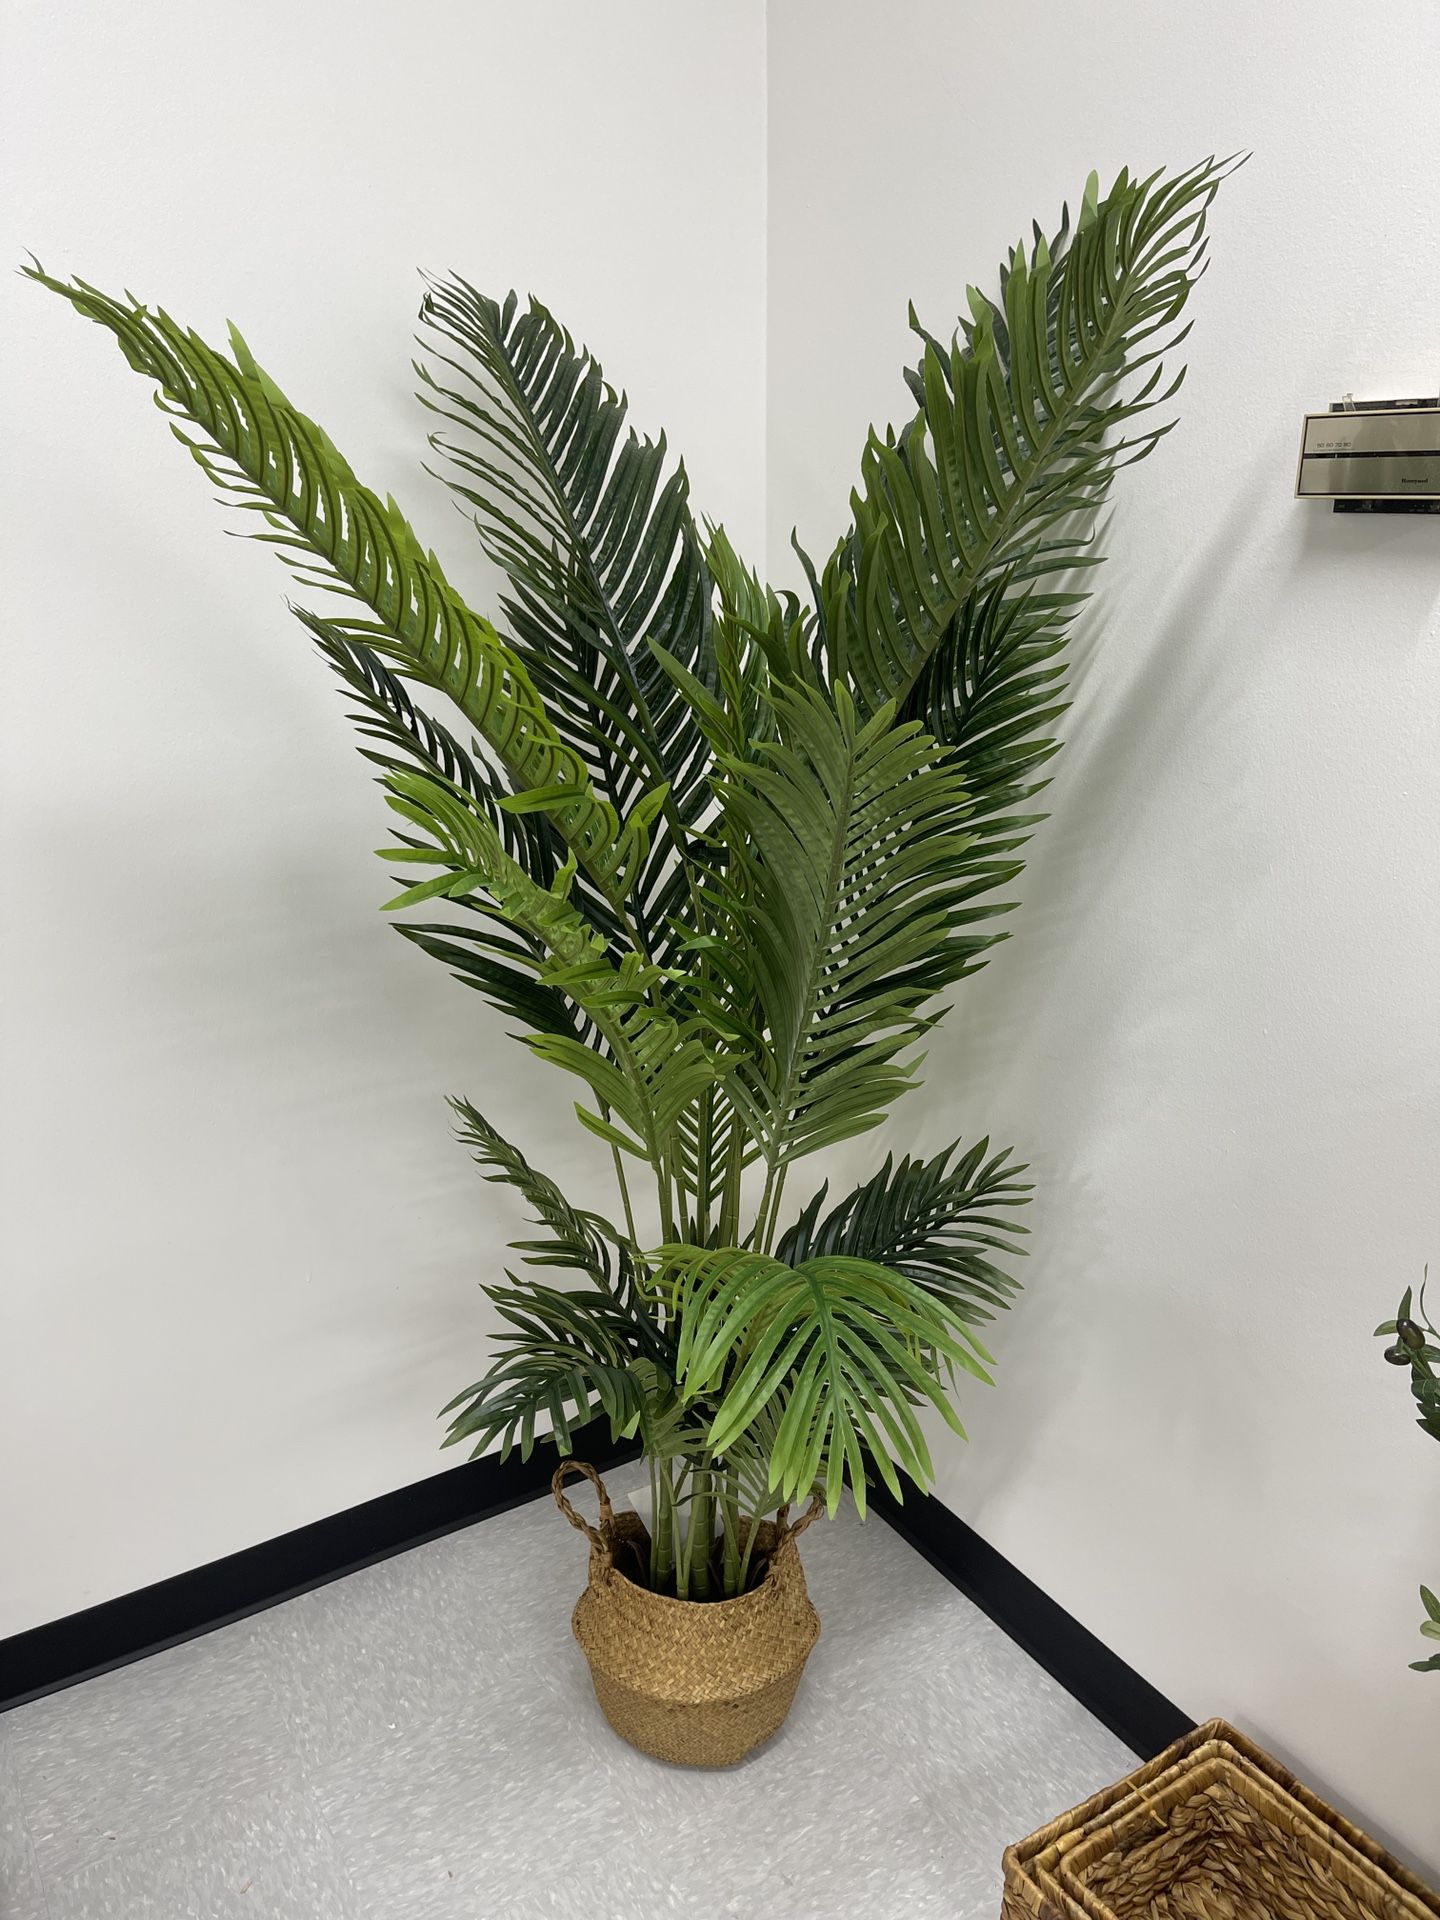 Artificial Areca Palm Plant 6 Feet Fake Palm Tree with 20 Trunks Faux Tree for Indoor Outdoor Modern Decoration Feaux Dypsis Lutescens Plants in Pot f